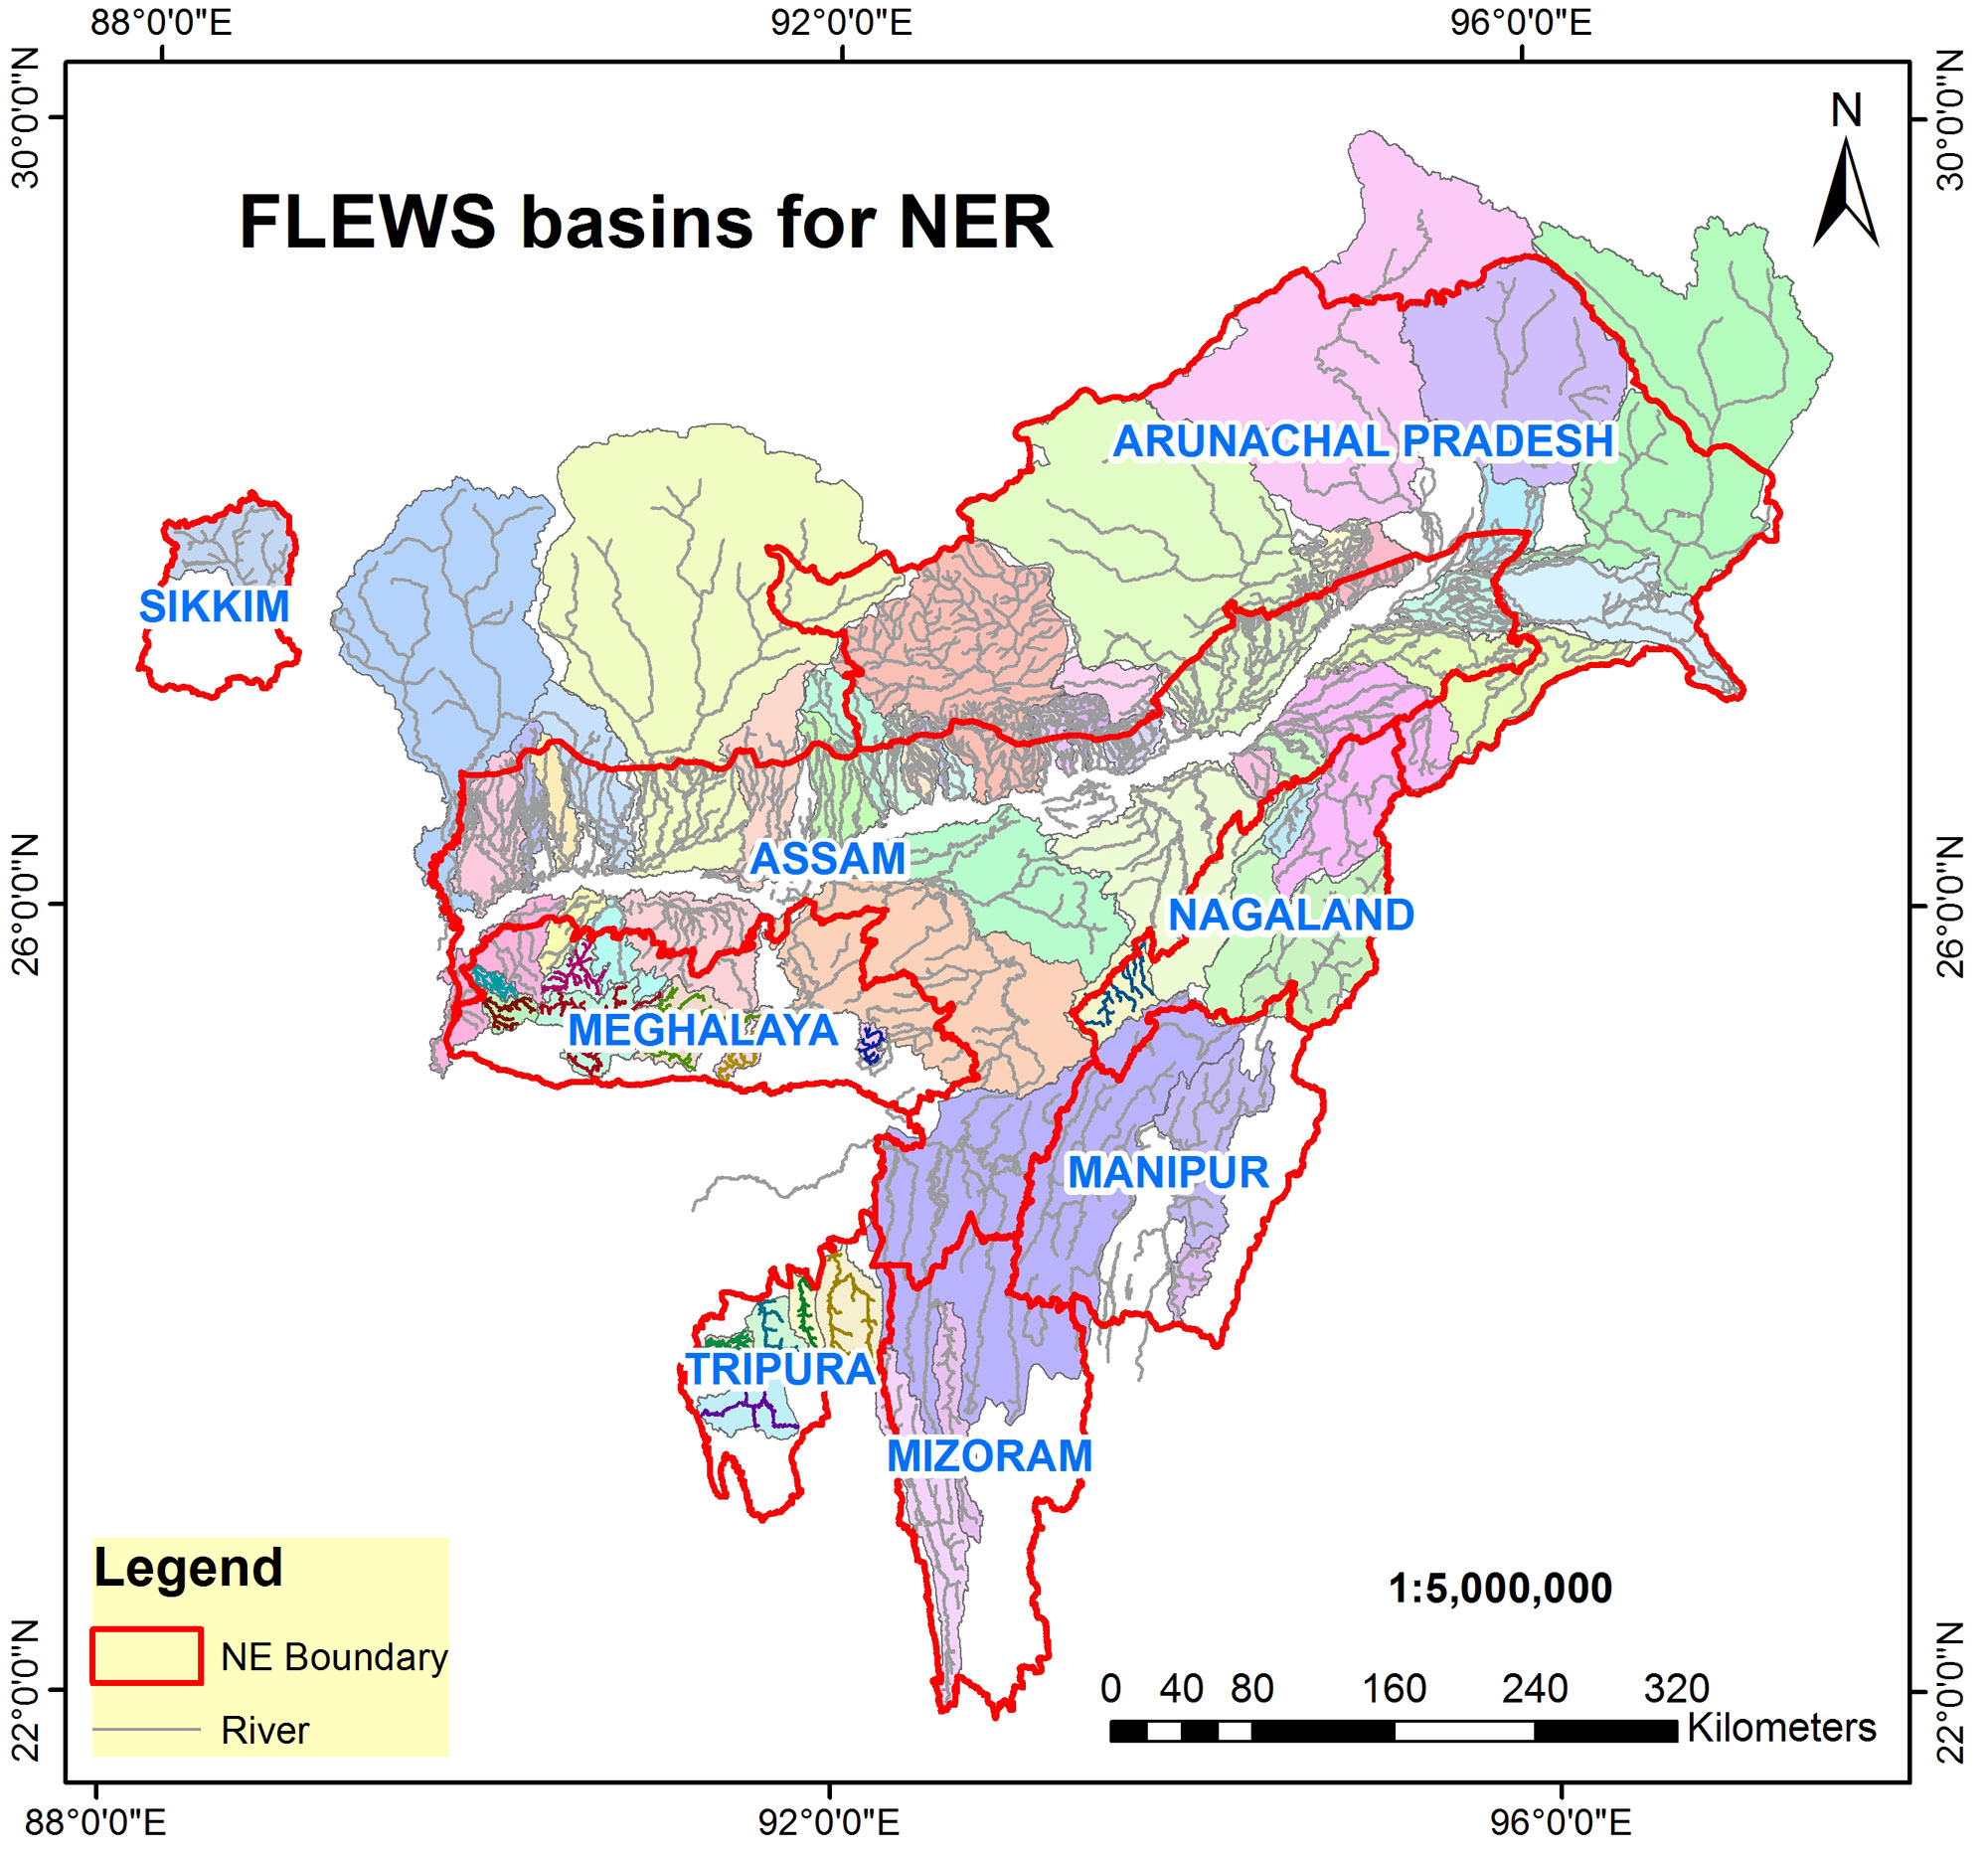 FLEWS Catchments for NER